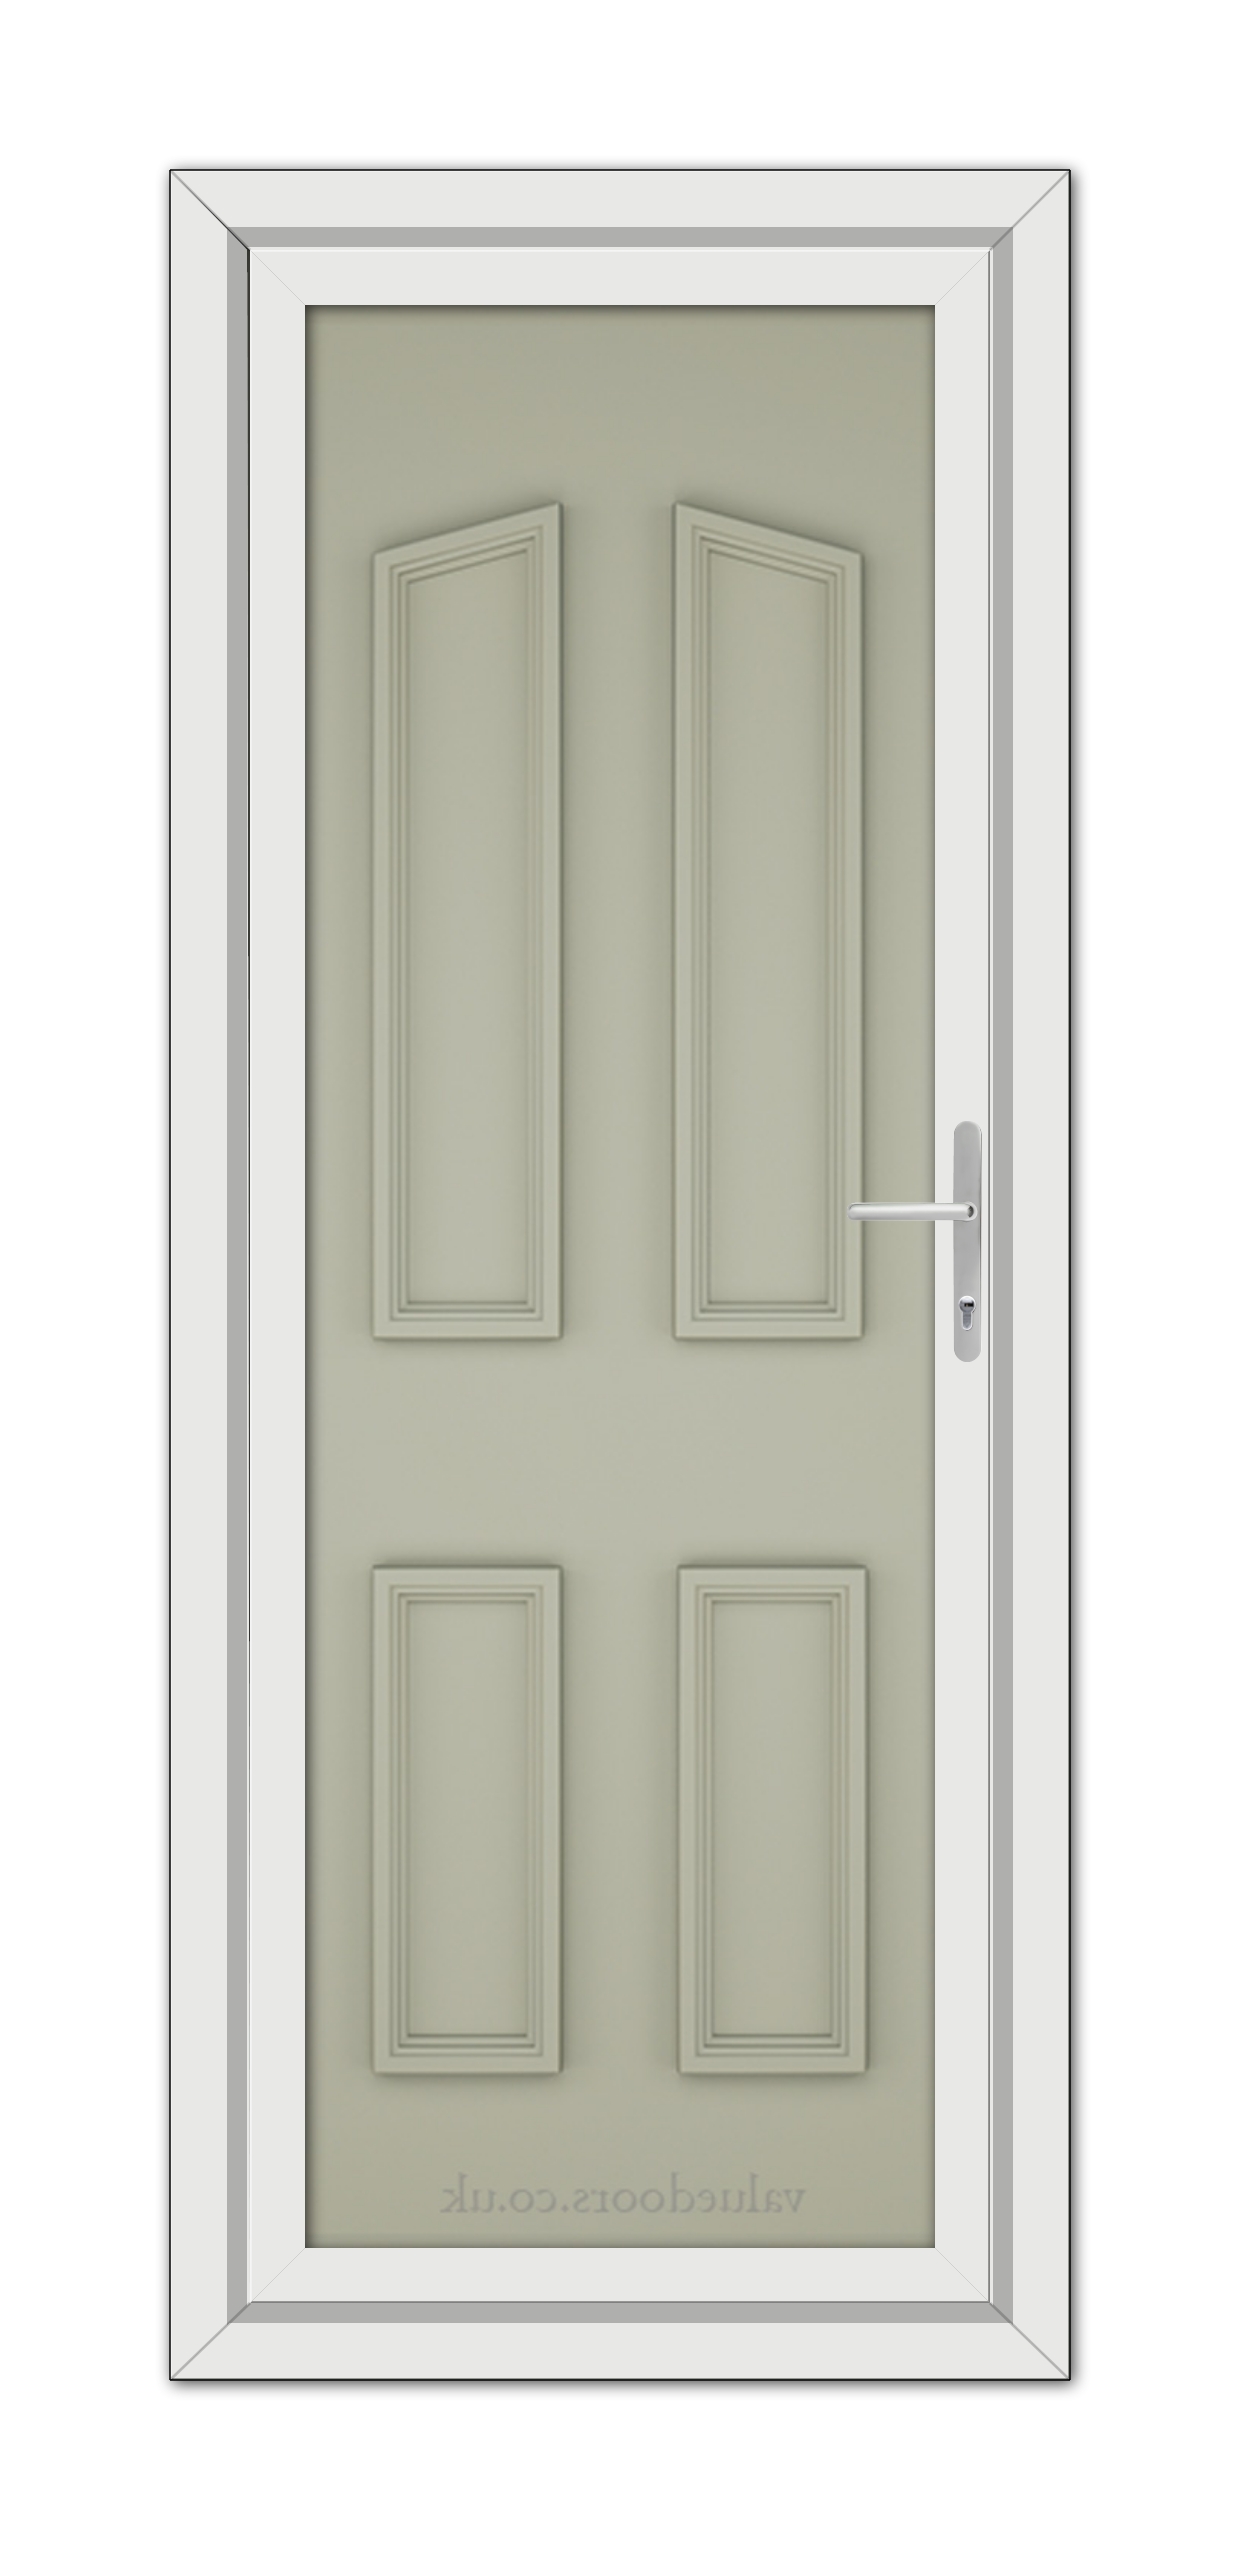 A agate grey door with four recessed panels and a modern silver handle, set within a white frame.